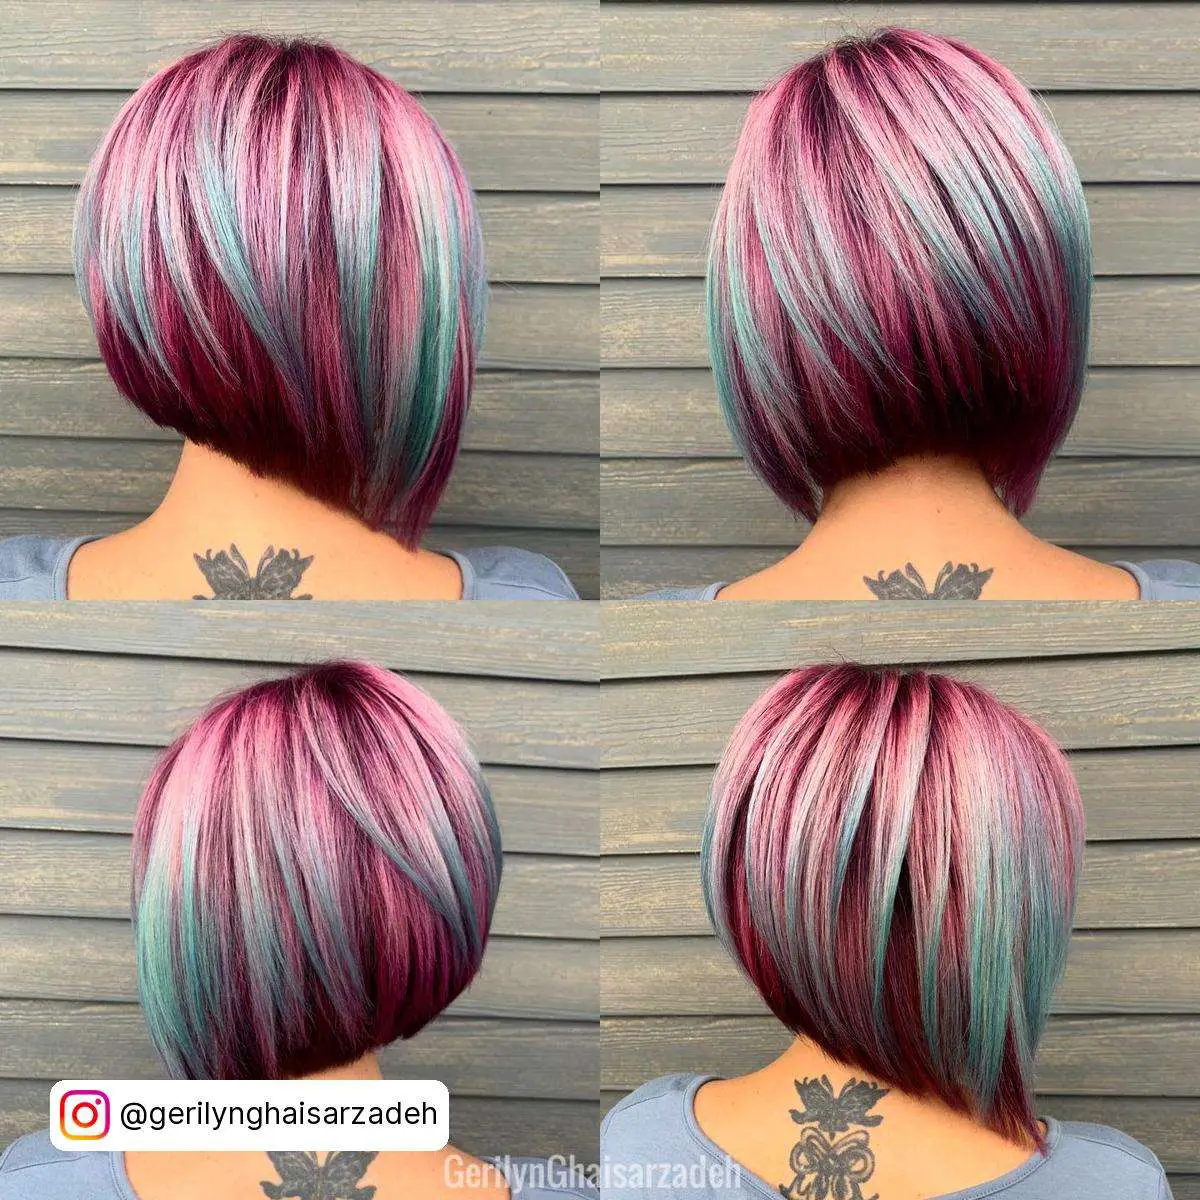 Pink And Blue Hair